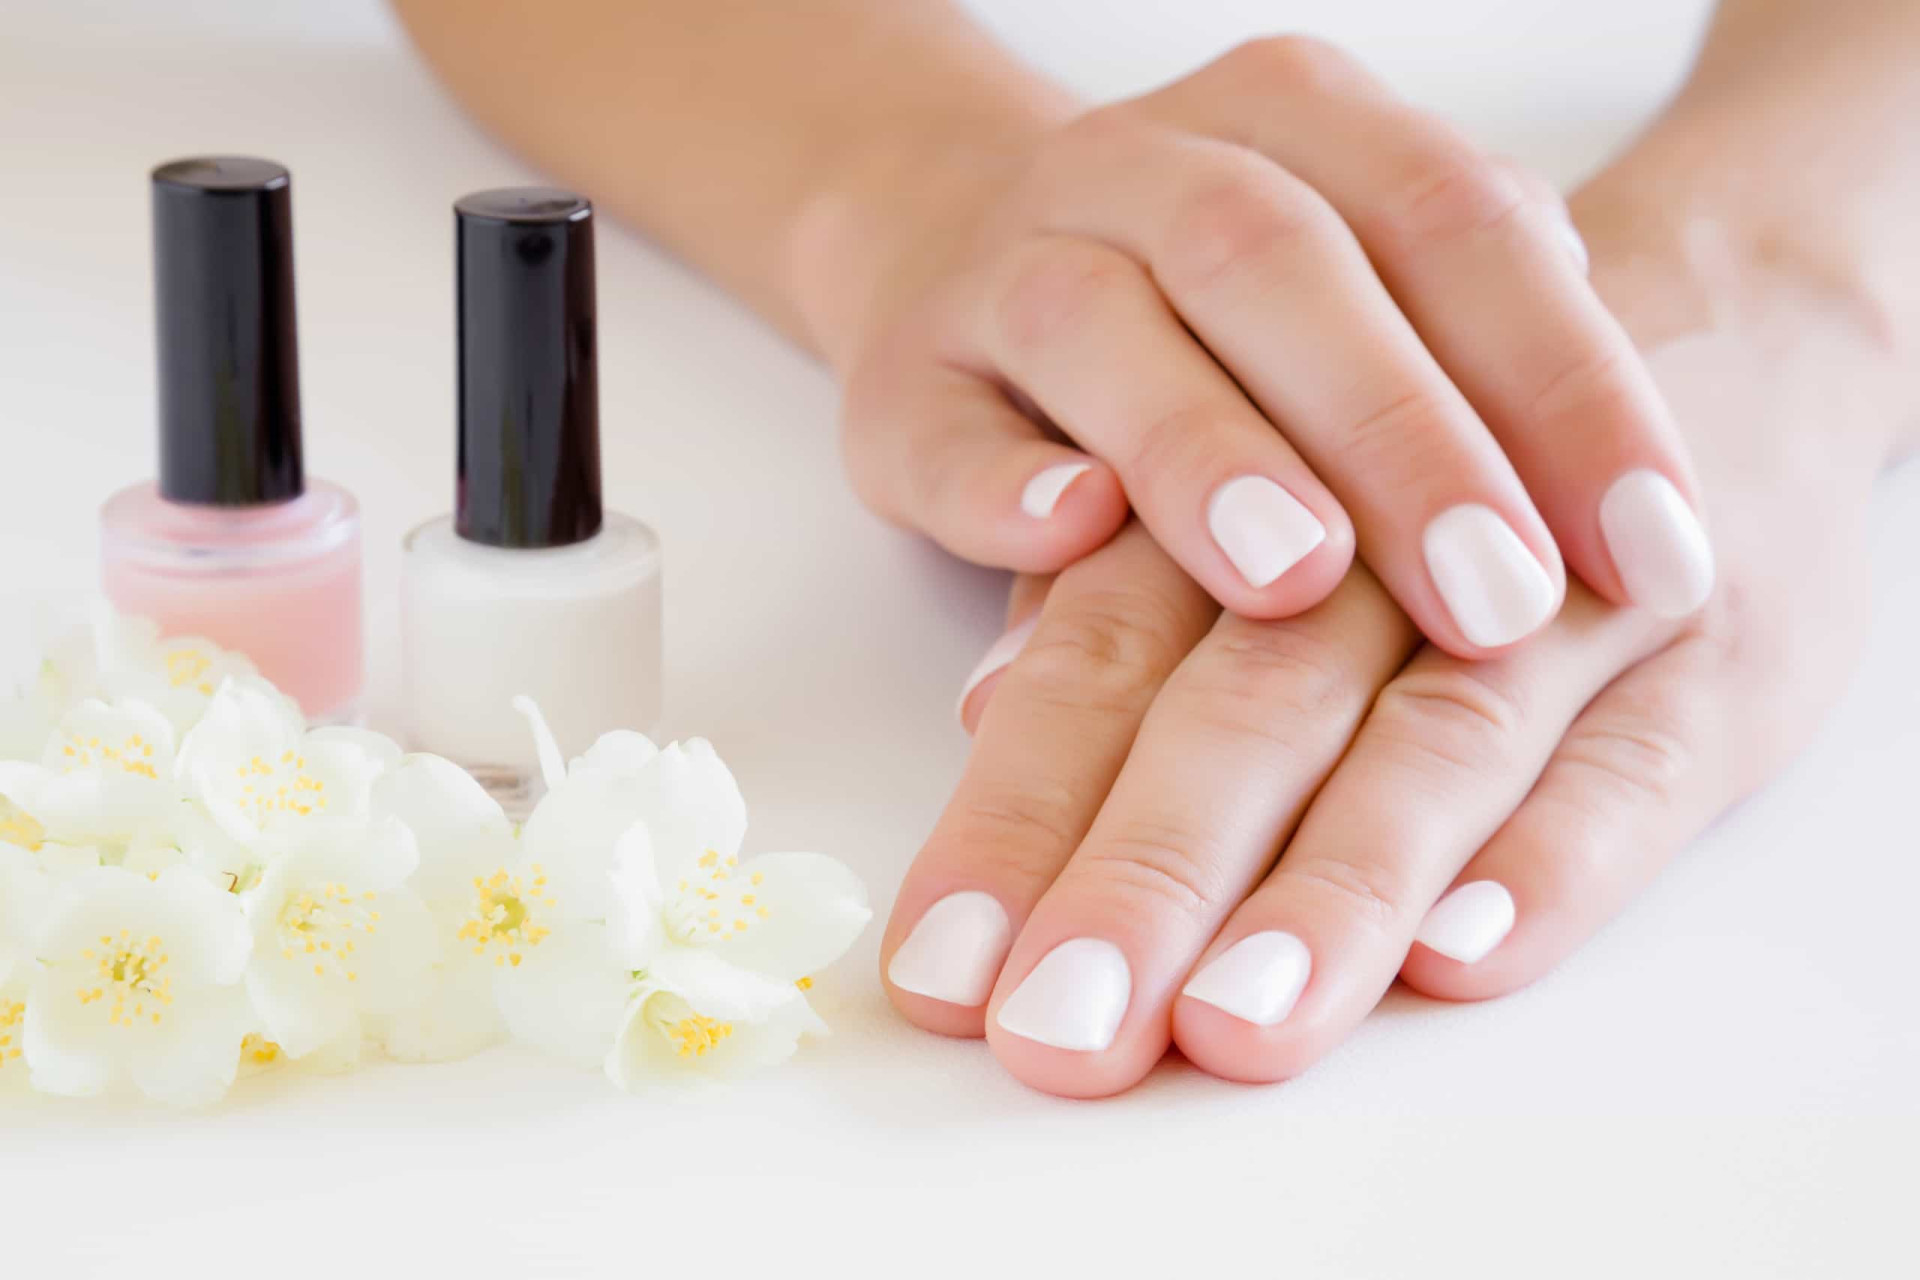 <p><span>The first step to take in the manicure is to remove any existing or leftover nail polish. You need a clean slate to work with. </span></p>